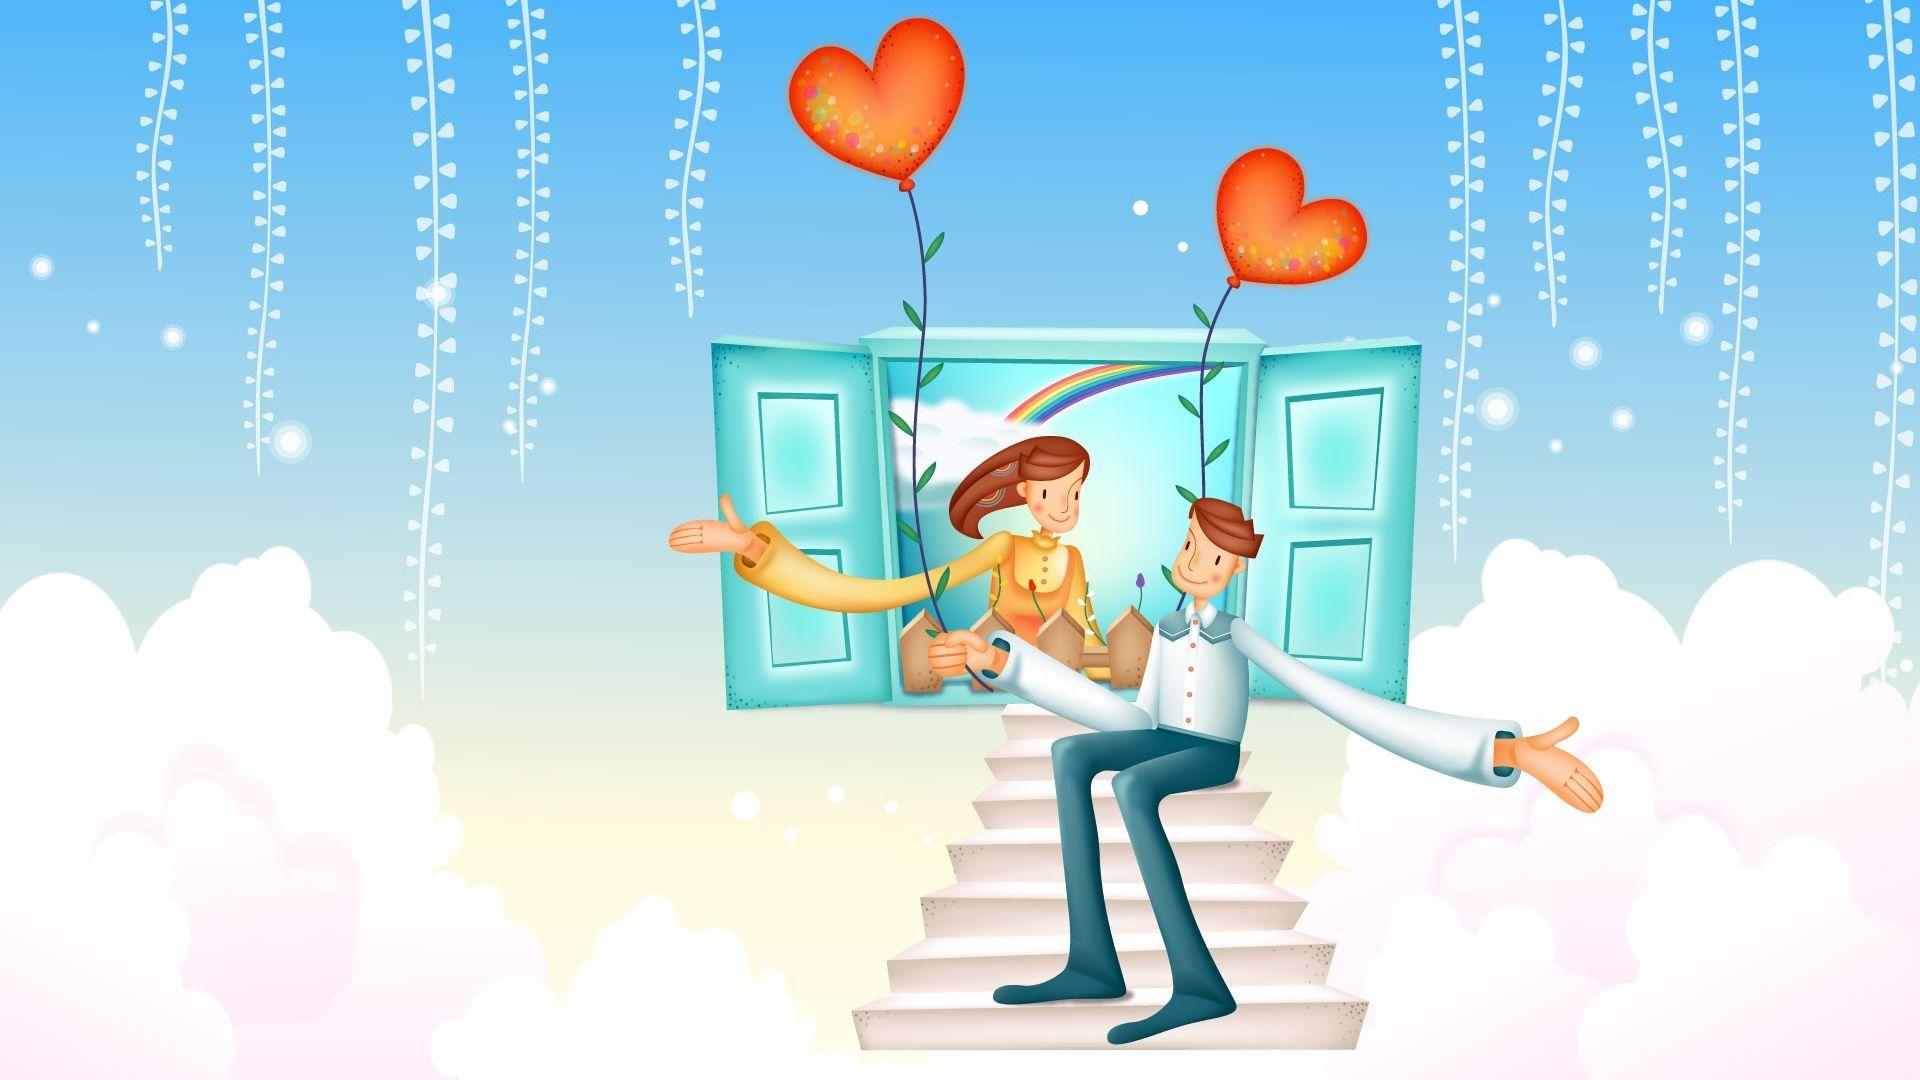 Happy Valentines Day 2015 Couple Wallpaper 2015. CGfrog Graphic